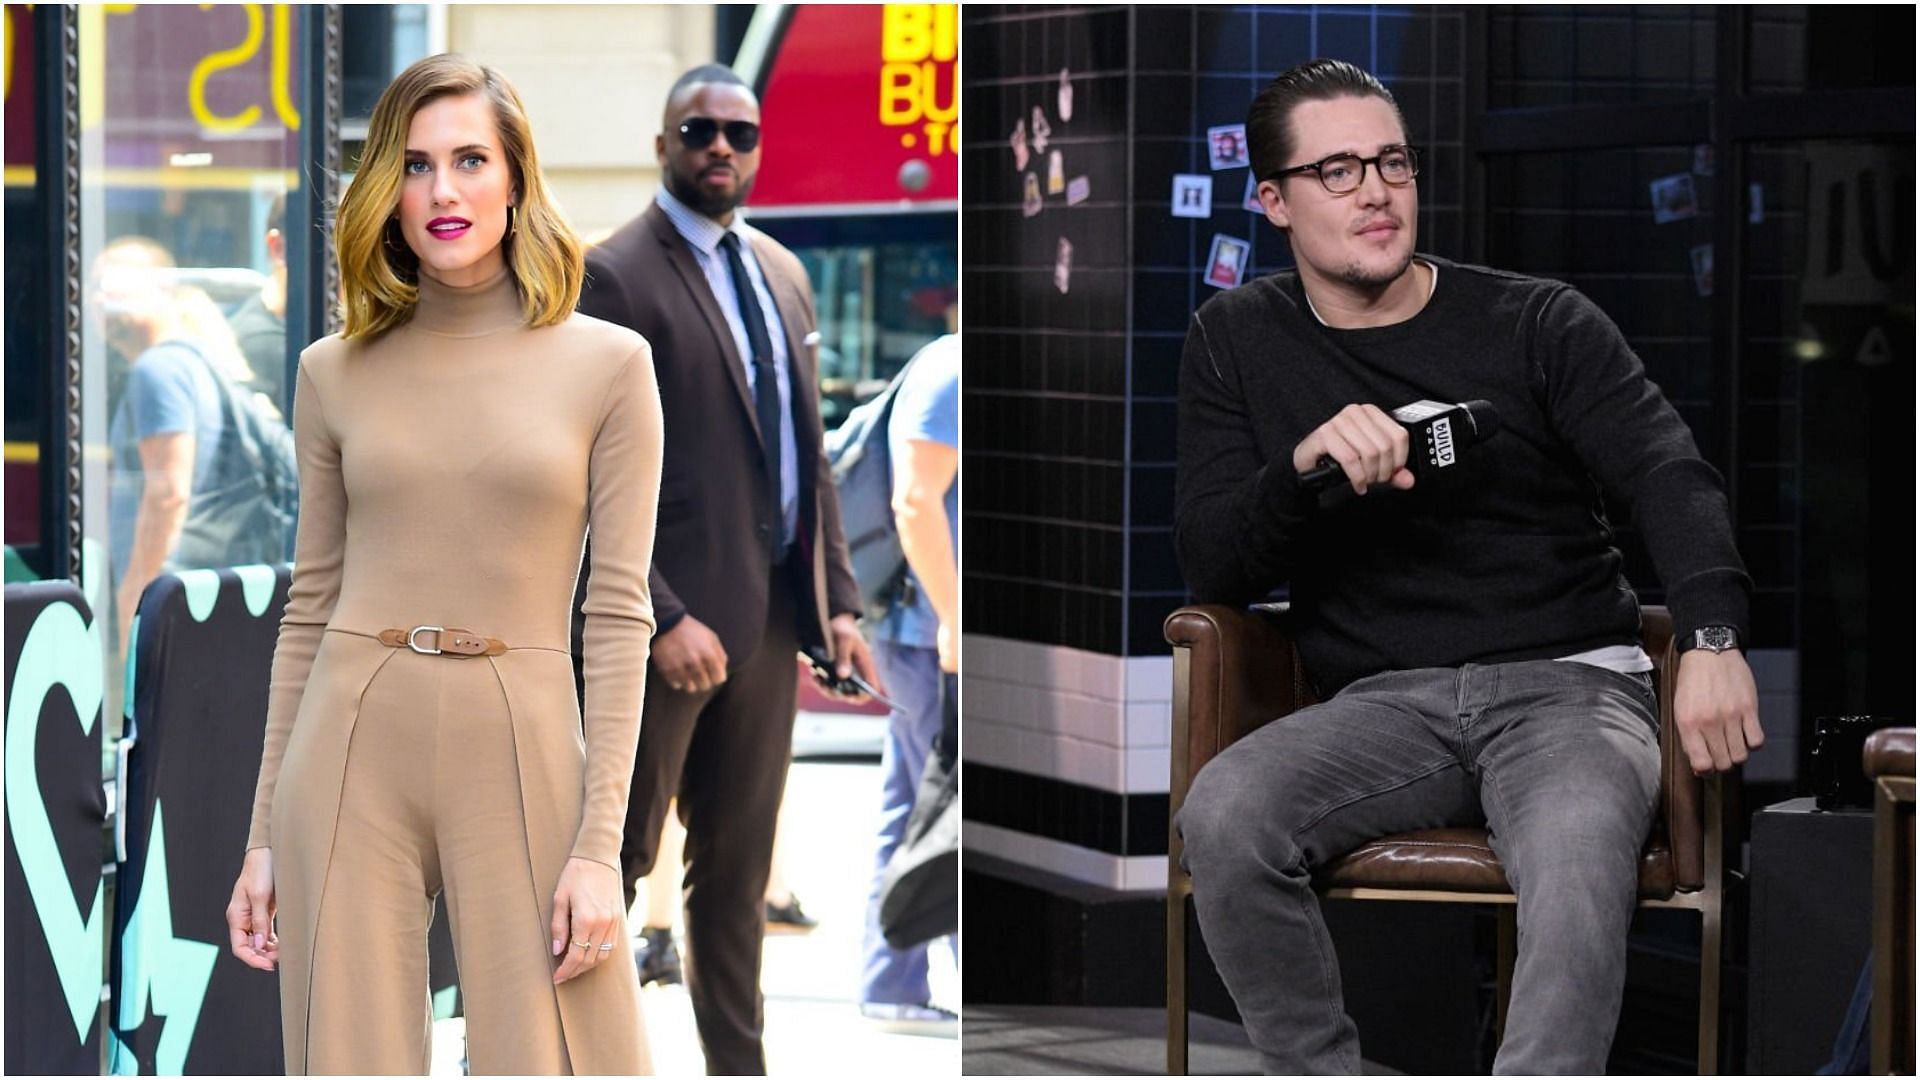 Allison Williams has reportedly welcomed her first child with Alexander Dreymon (Images via Raymond Hall and Gary Gershoff/Getty Images)